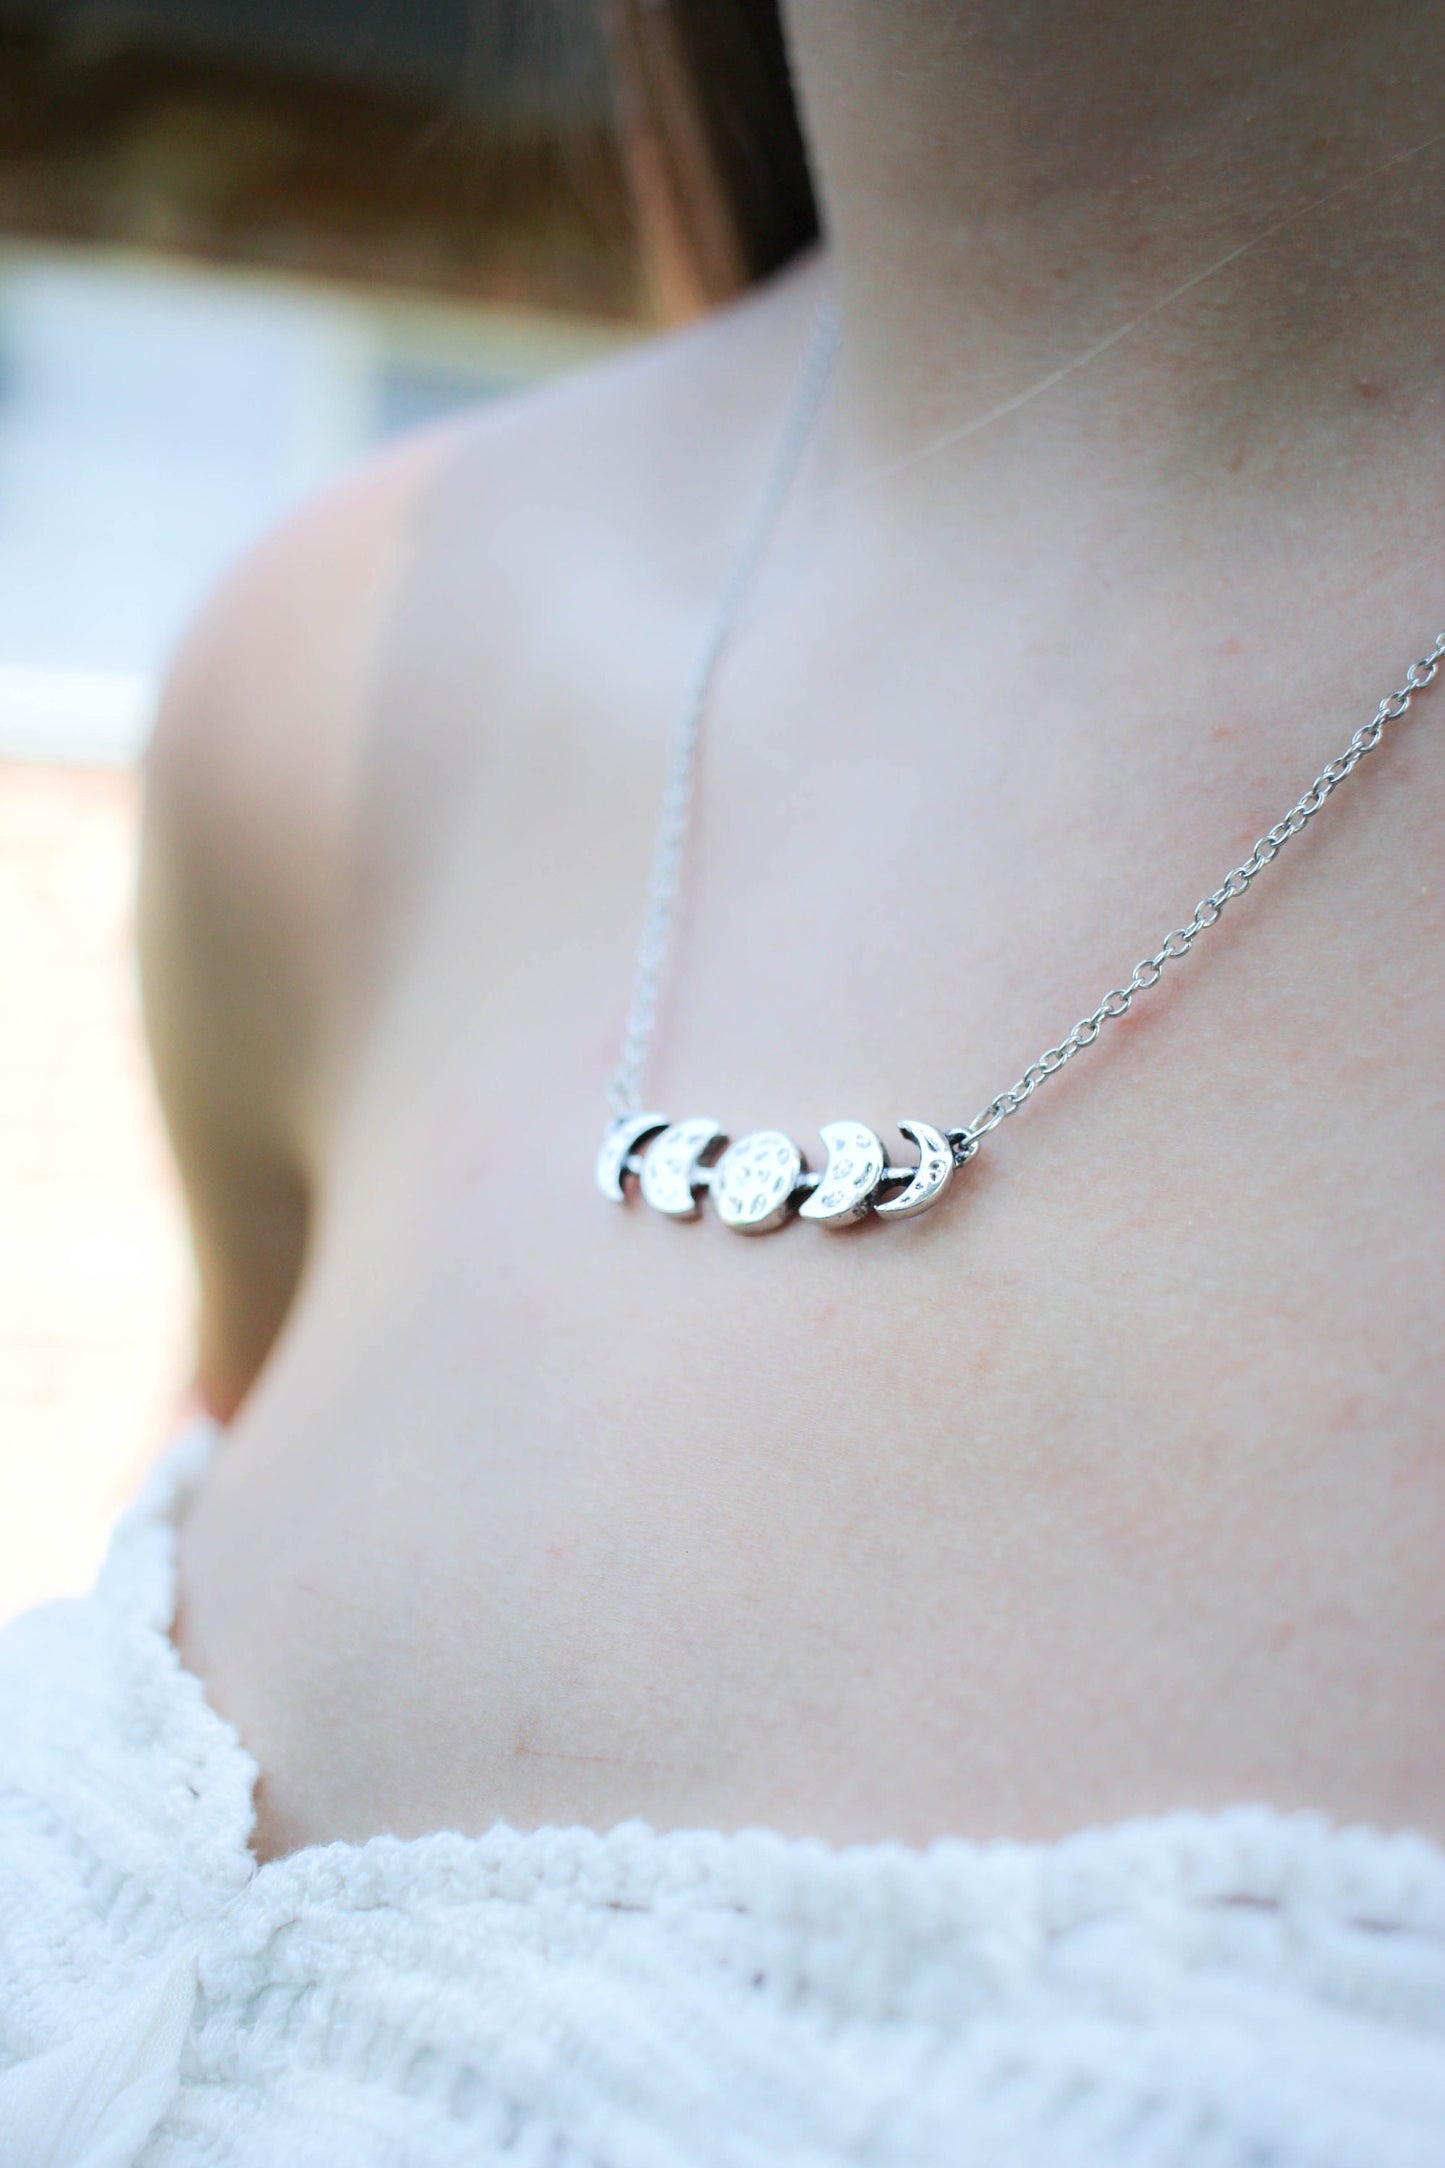 Moon Necklace - Moon Phase Necklace | Silver Moon Necklace | Moon Jewelry Gifts for Her Gifts under 20 | Crescent Moon Necklace